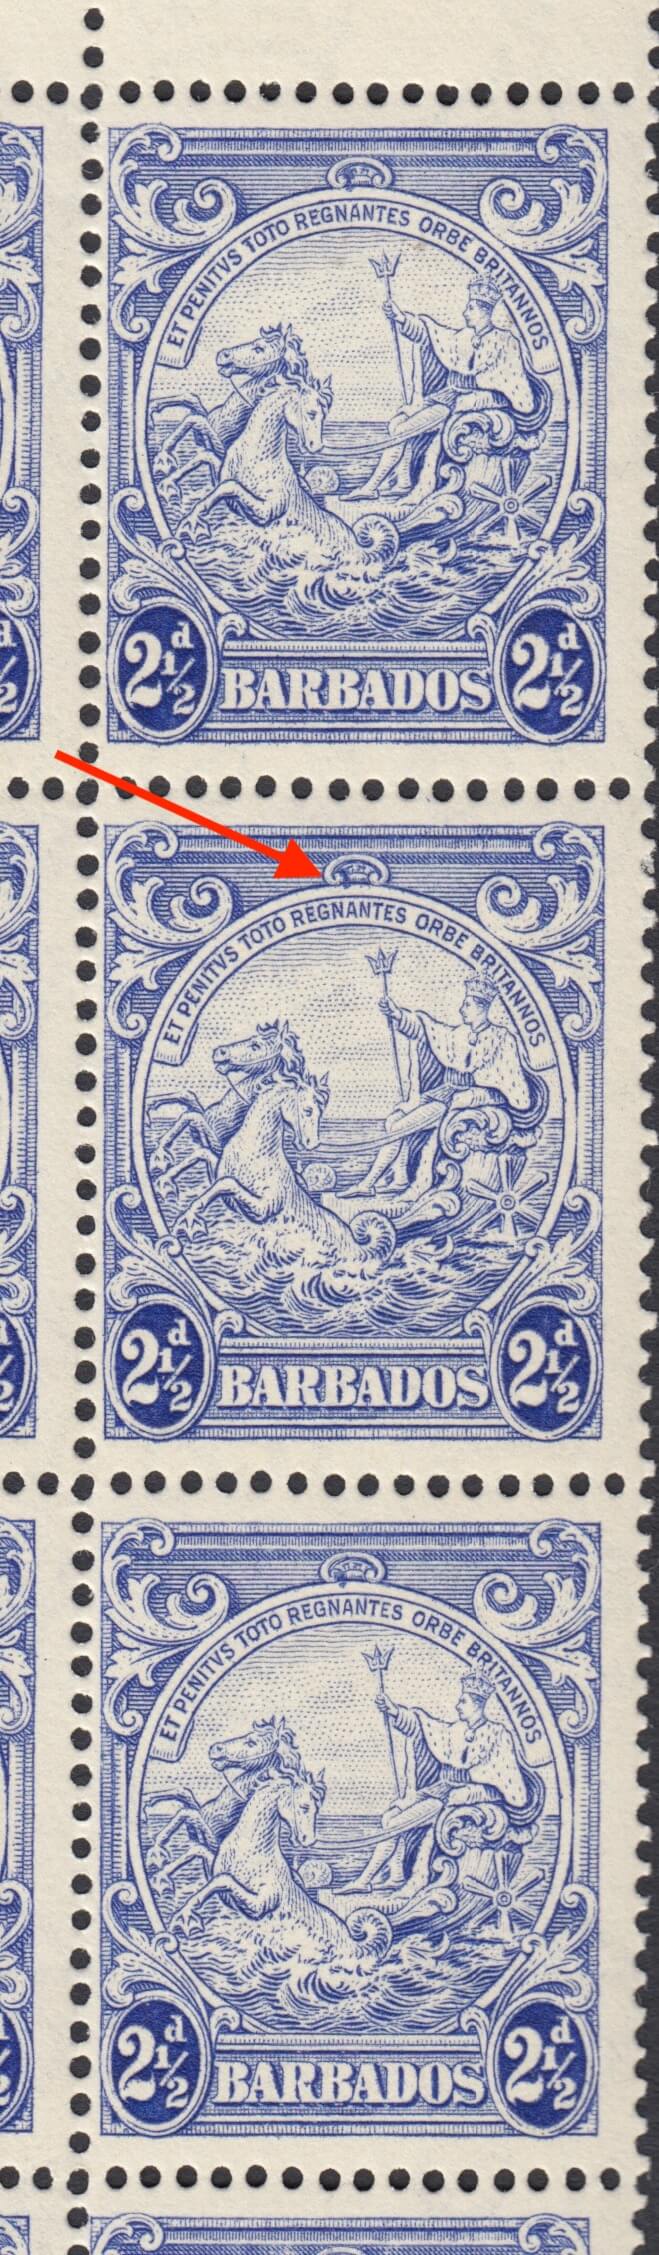 Barbados SG251a column with Mark on Central Ornament flaw